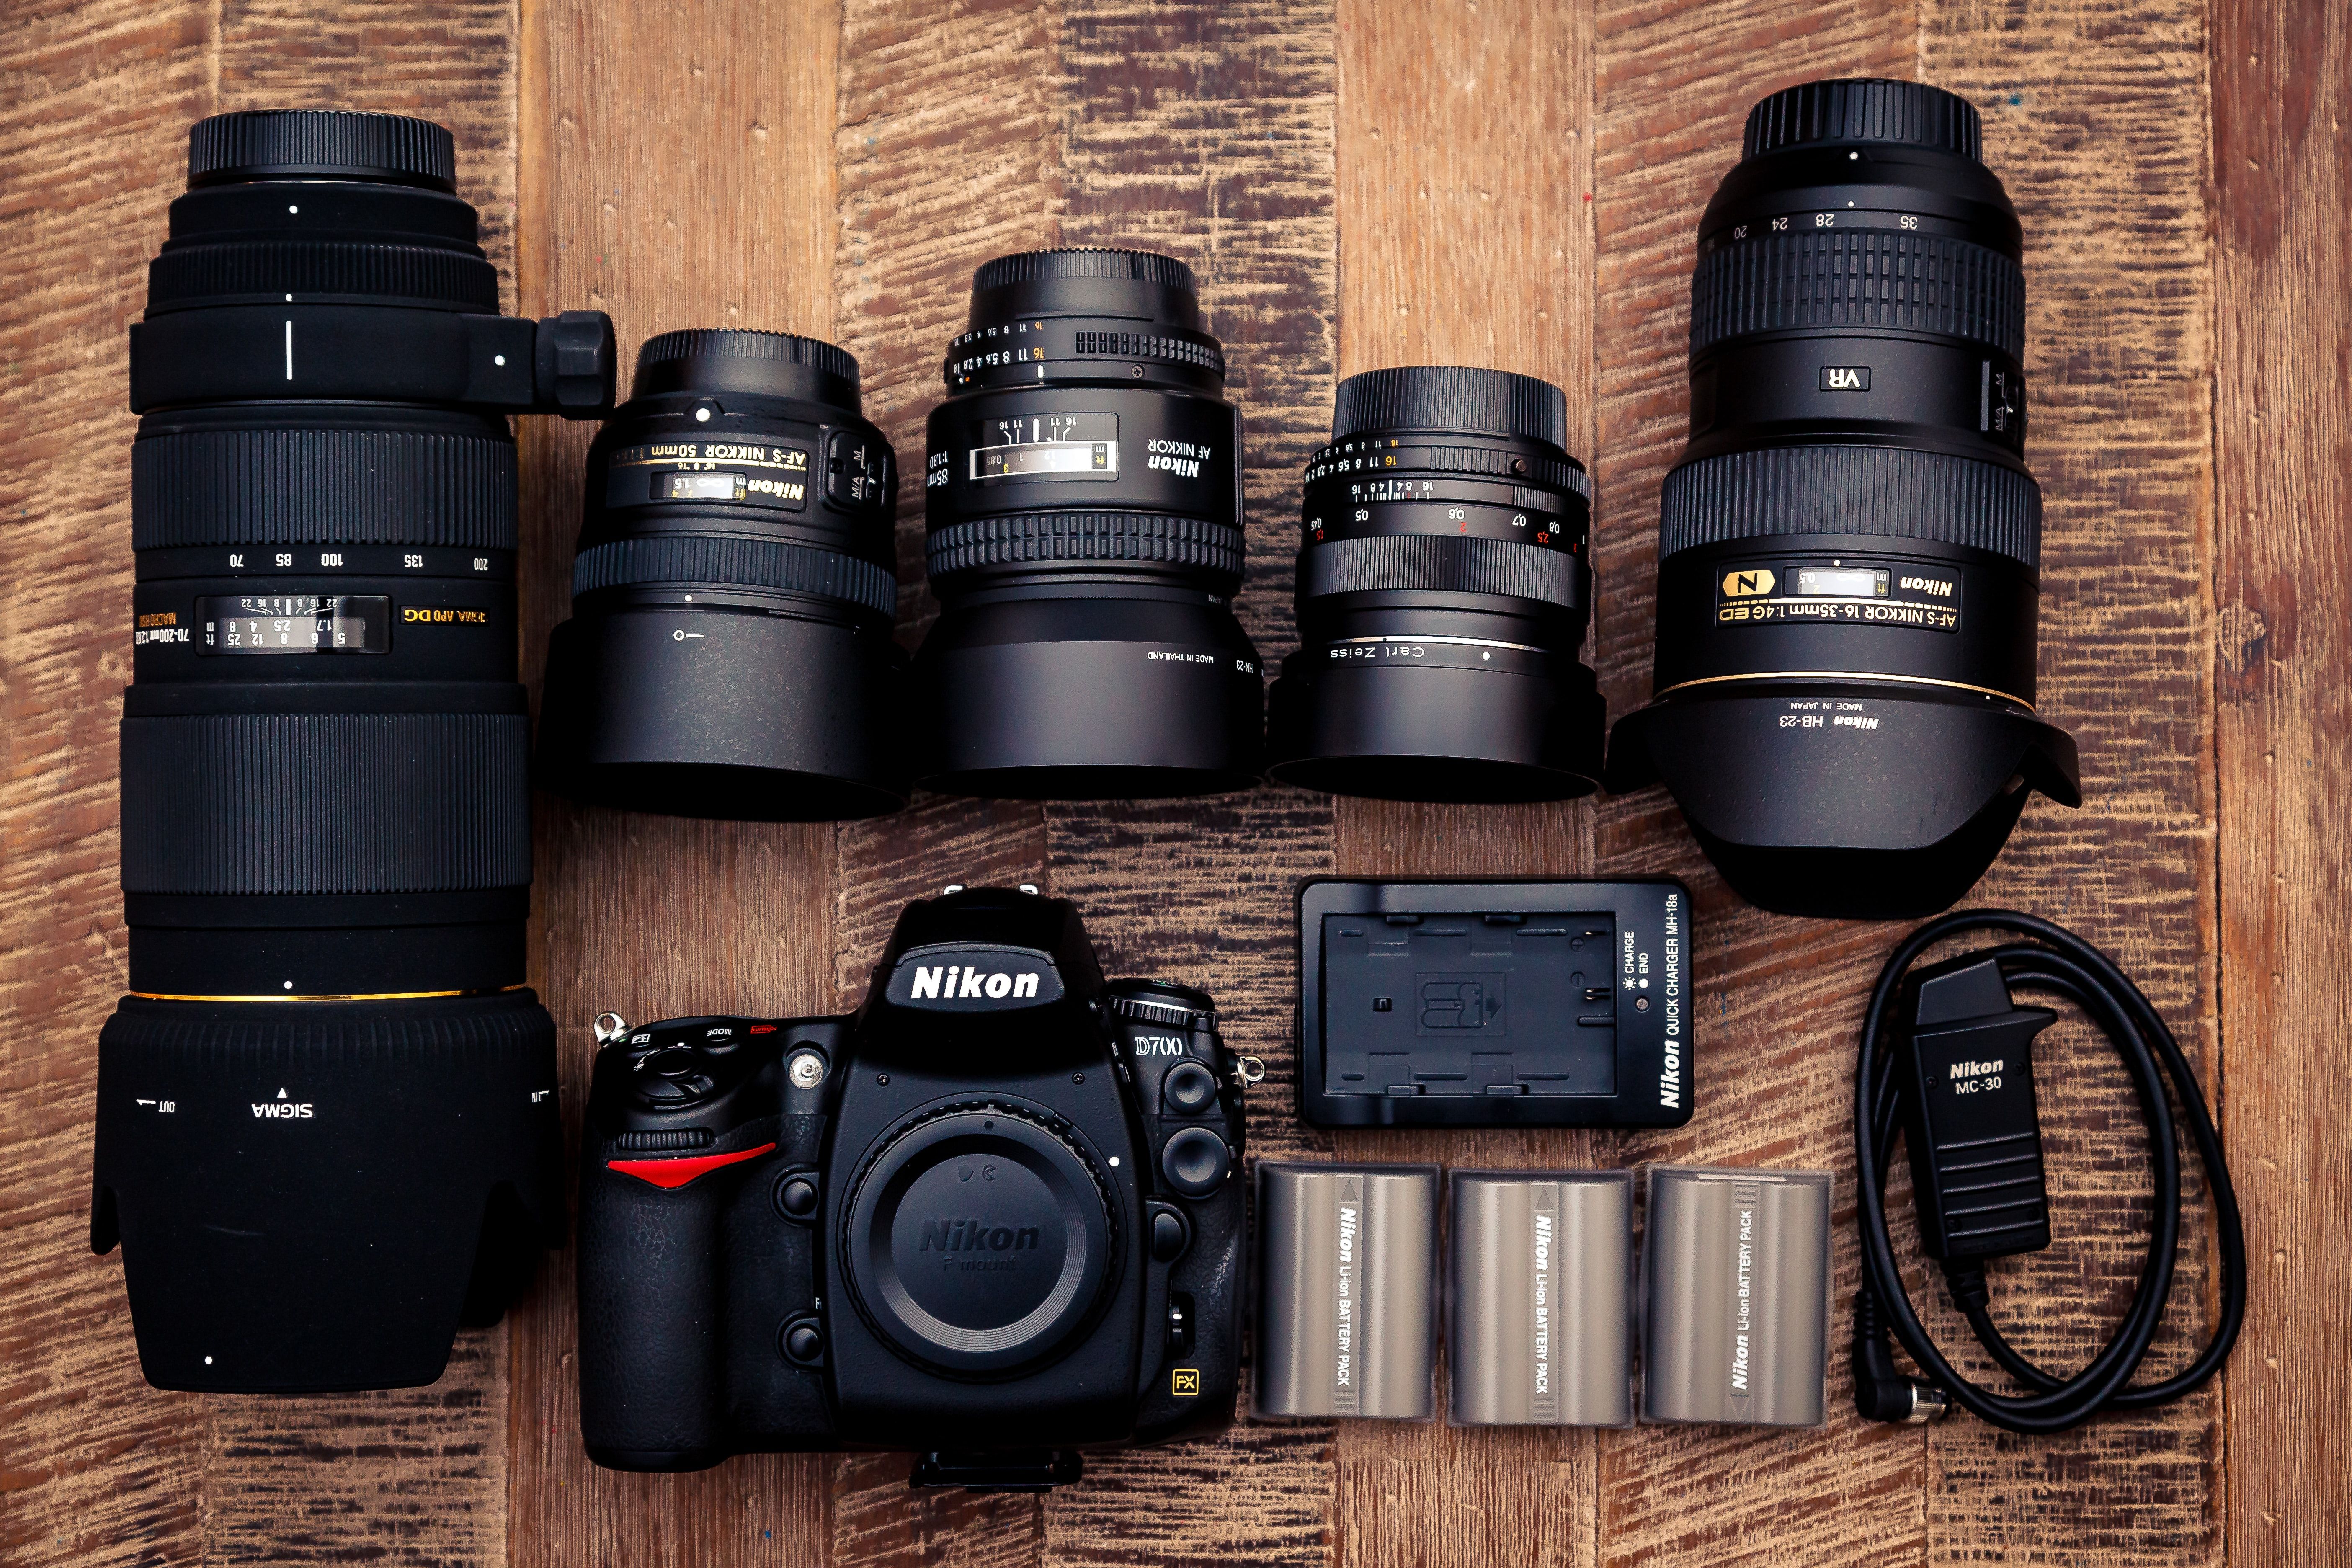 Photo of different camera lenses and bodies side by side